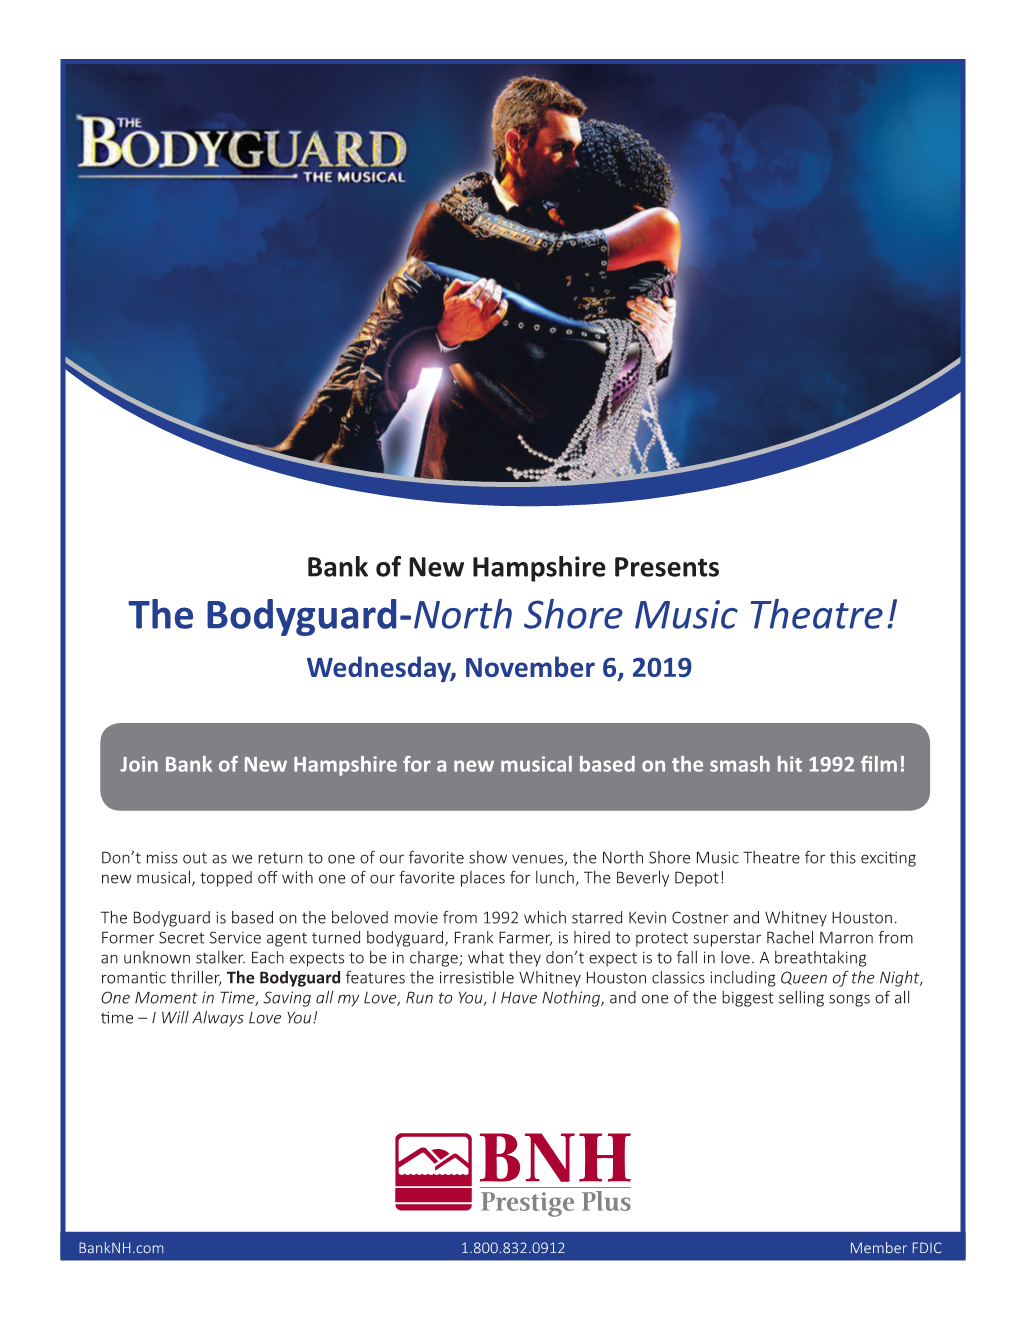 The Bodyguard-North Shore Music Theatre! Wednesday, November 6, 2019